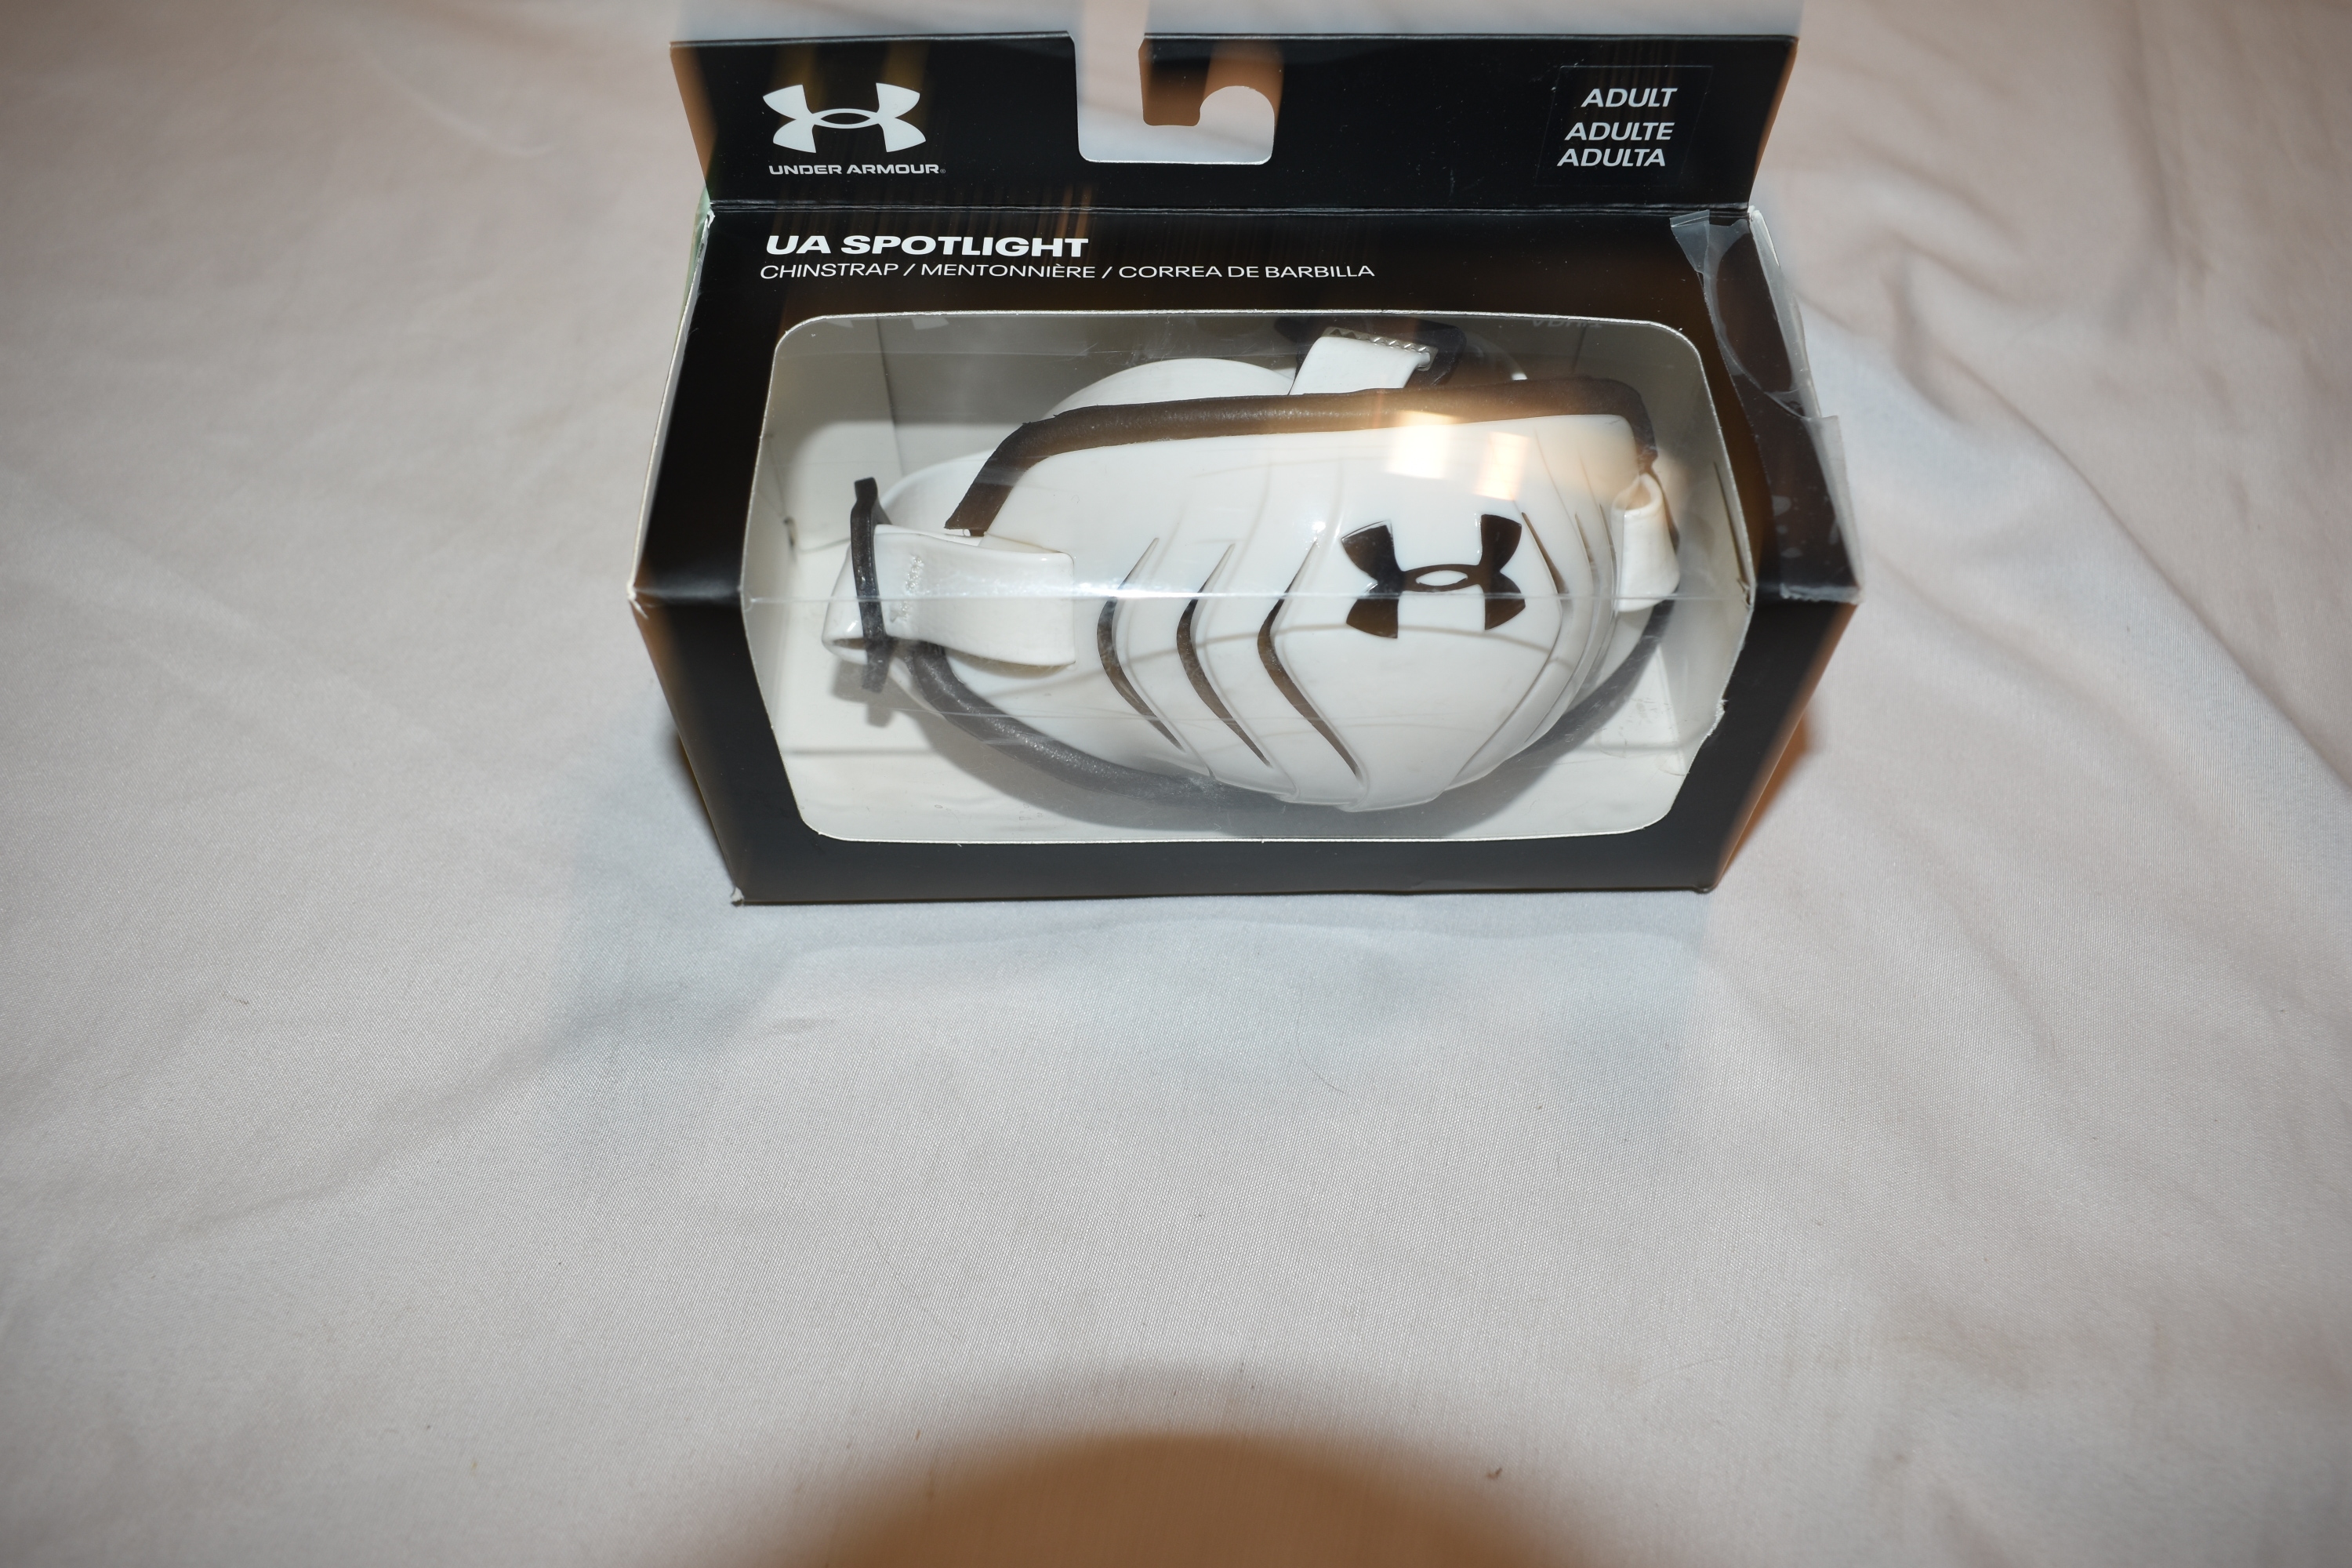 Under Armour Spotlight Adult Chinstrap, White (open box)